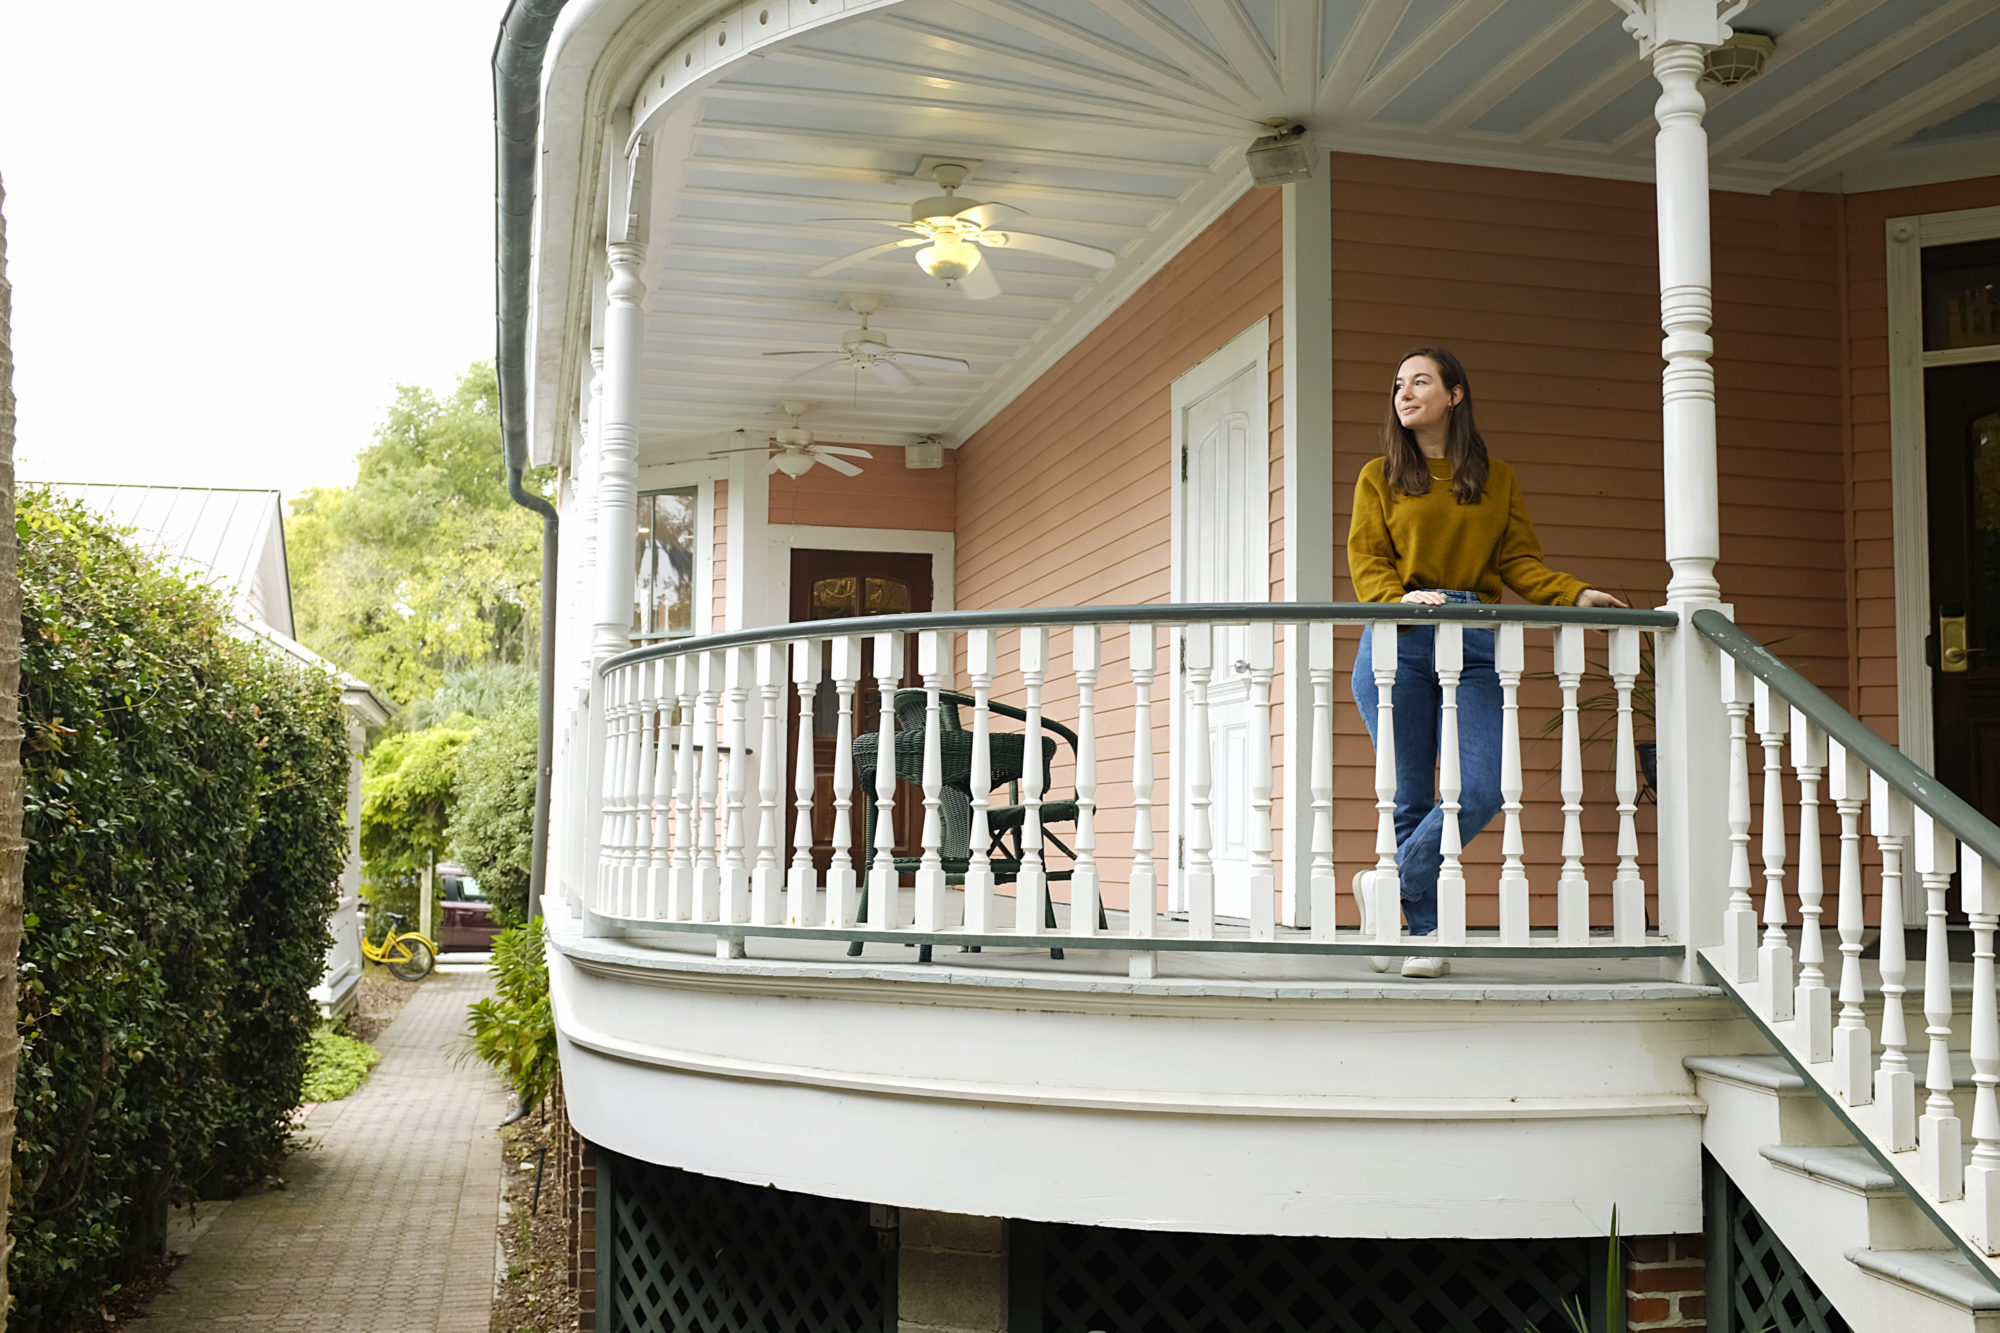 Alyssa stands on the balcony at The Beaufort Inn